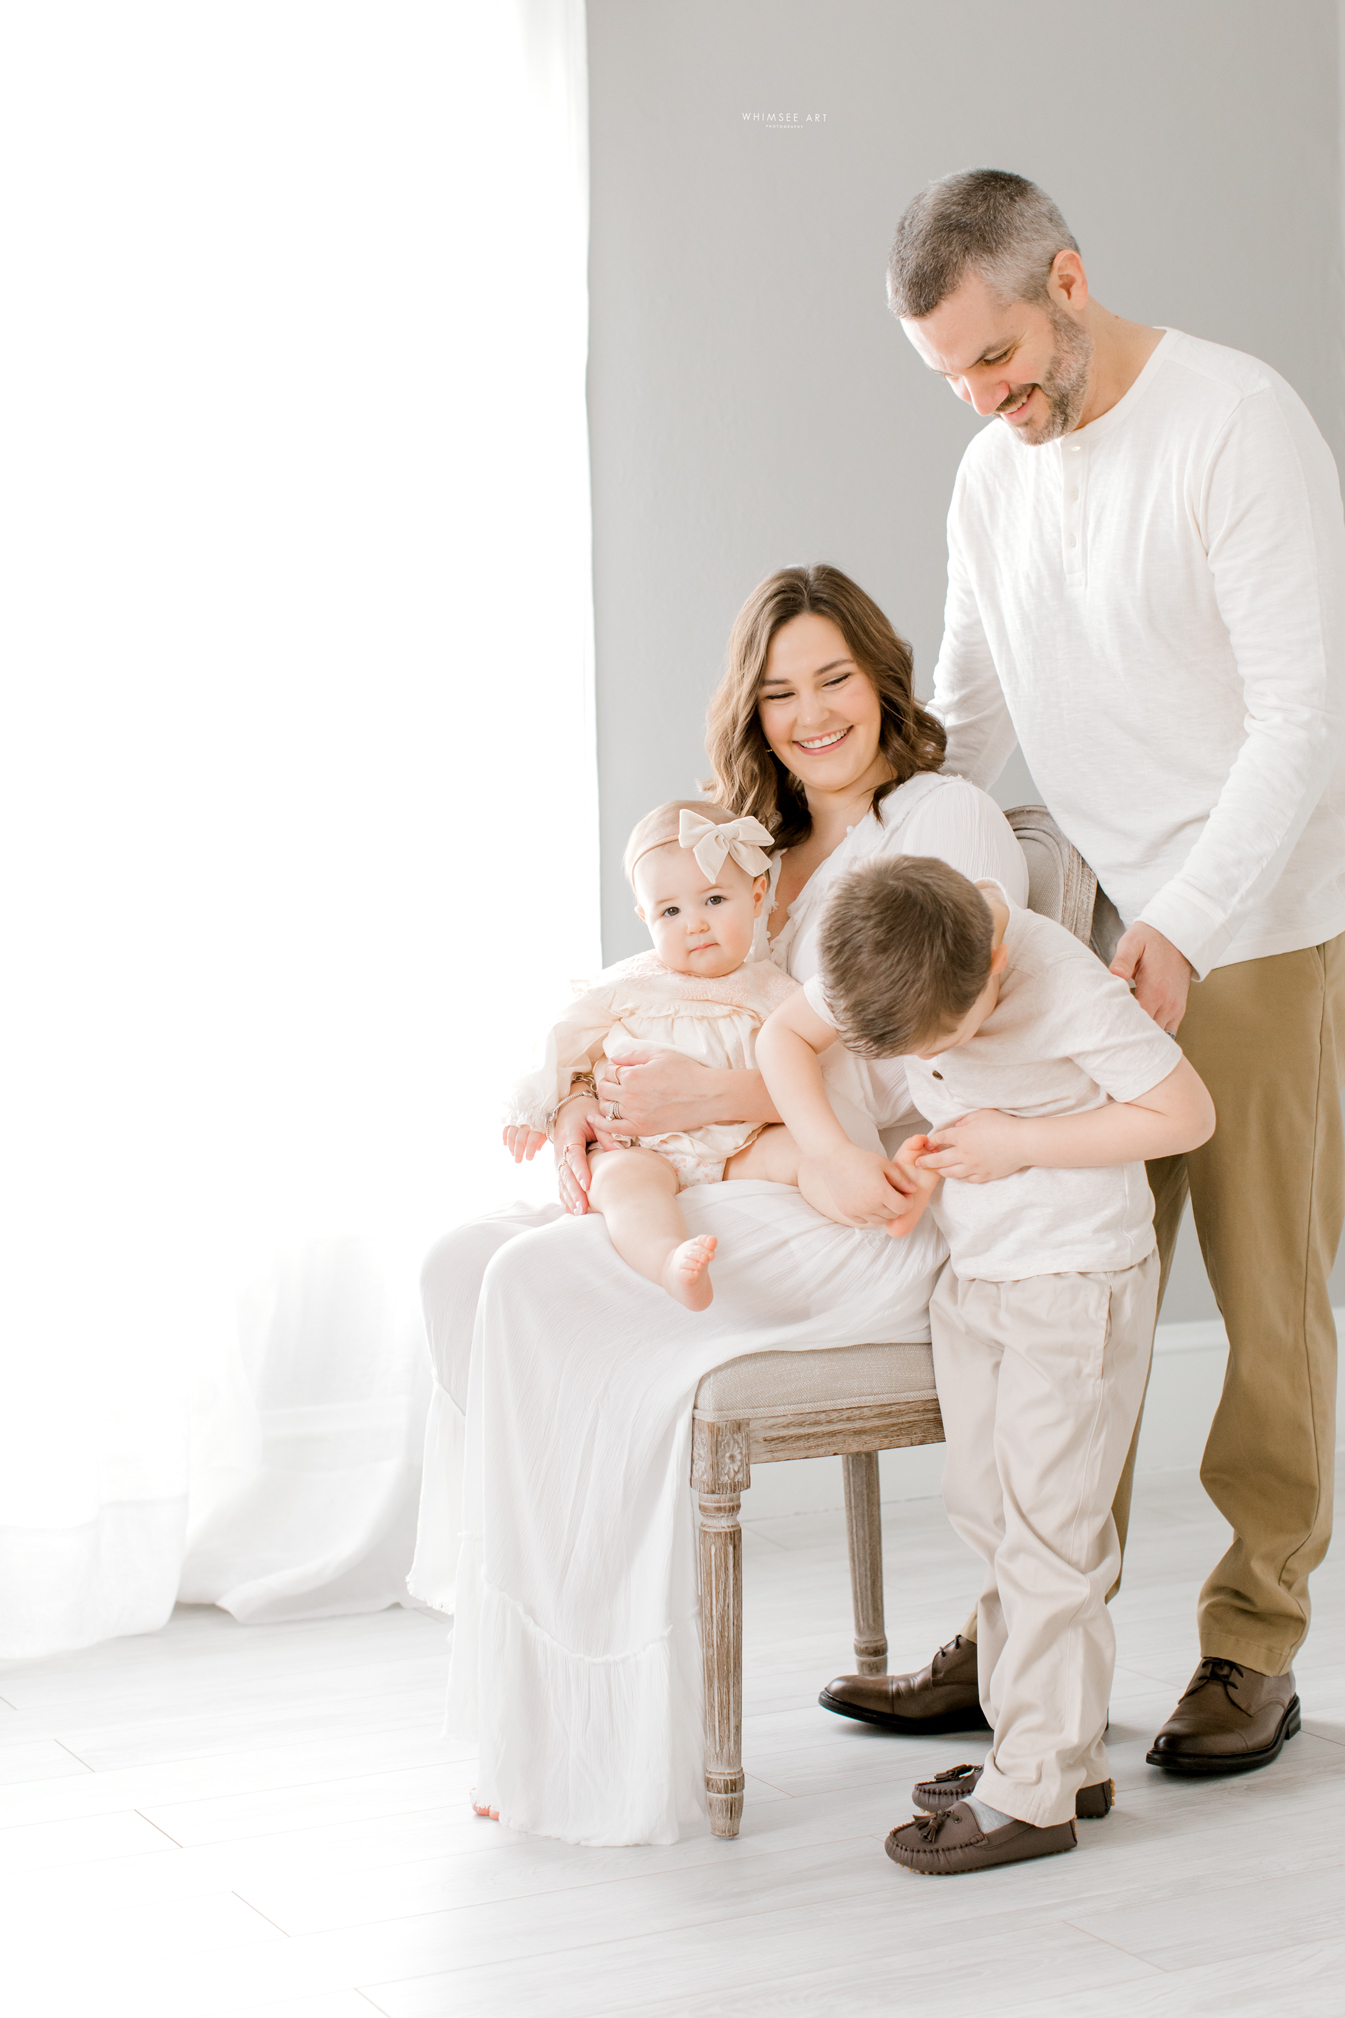 Ellie and Family | Whimsee Art Photography | Roanoke Photographers